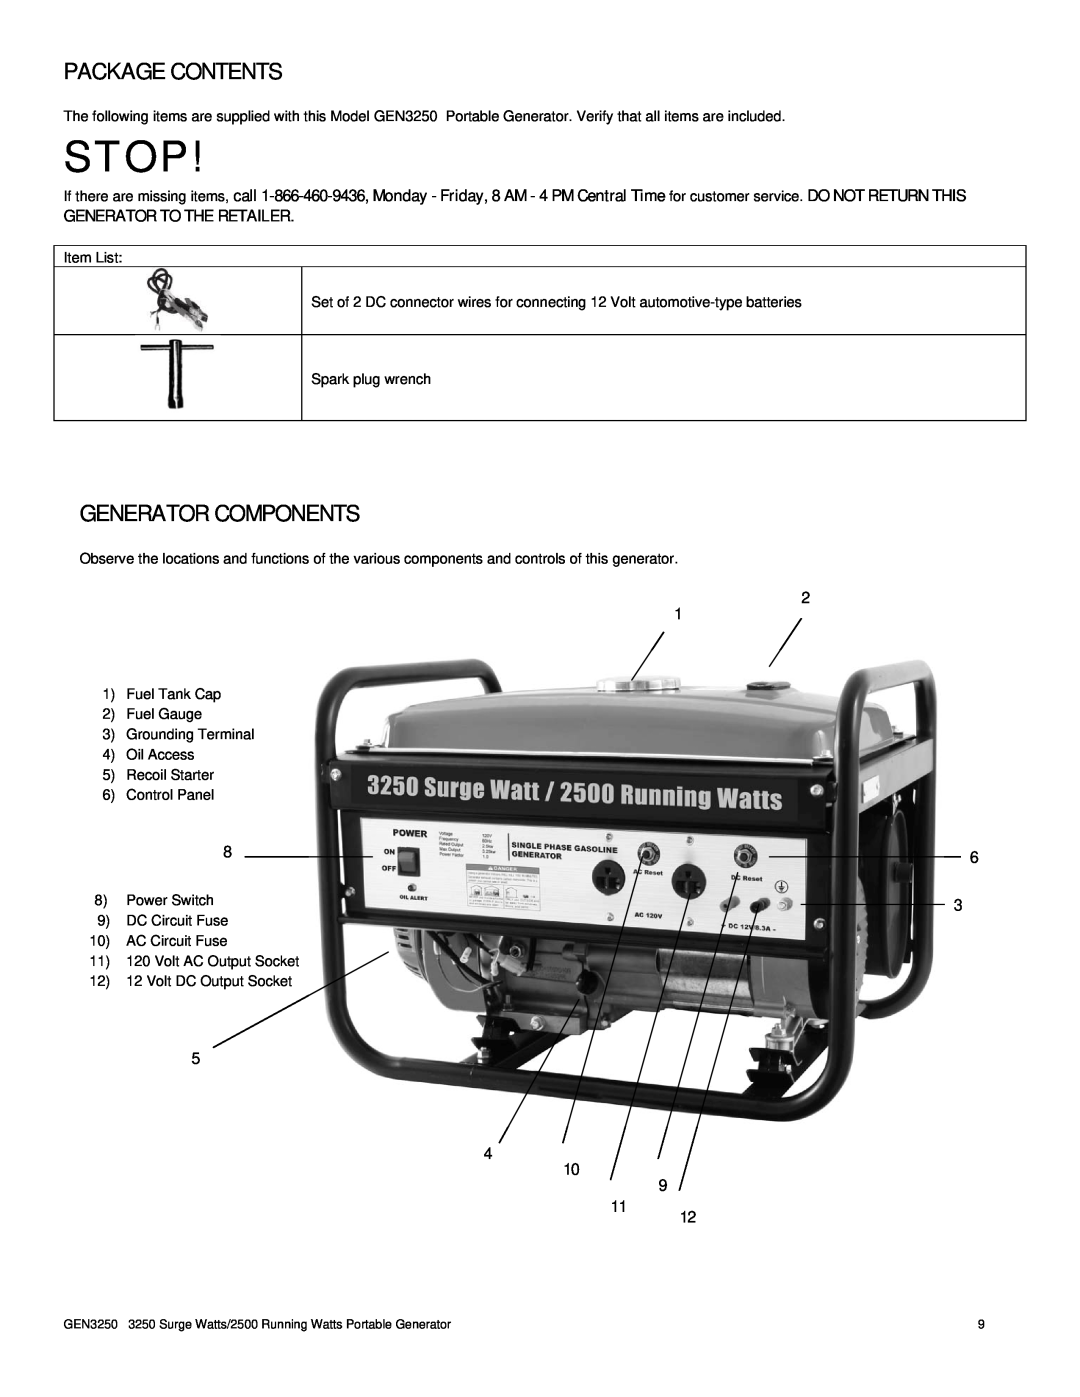 Buffalo Tools GEN3250 instruction manual Package Contents, Generator Components, Stop, Generator To The Retailer 